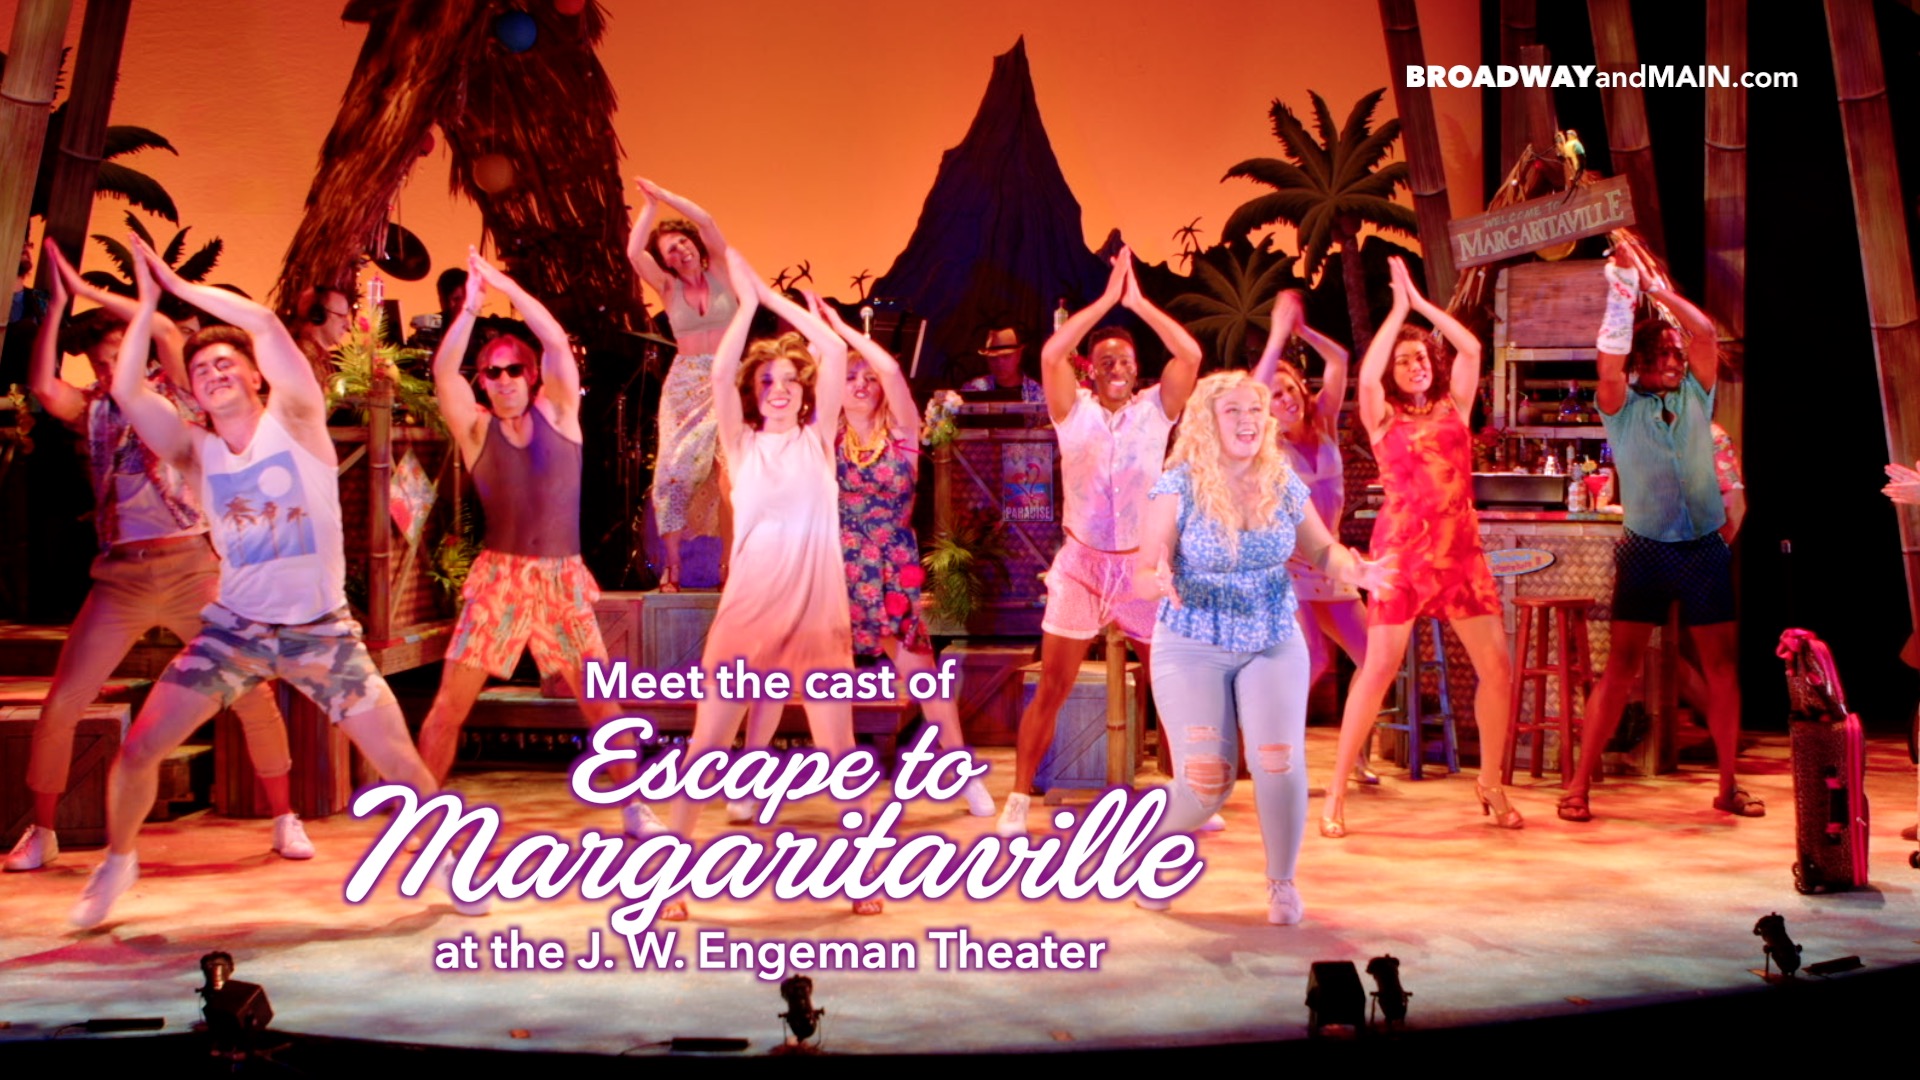 Meet the Cast of ESCAPE TO MARGARITAVILLE at the John W. Engeman Theater